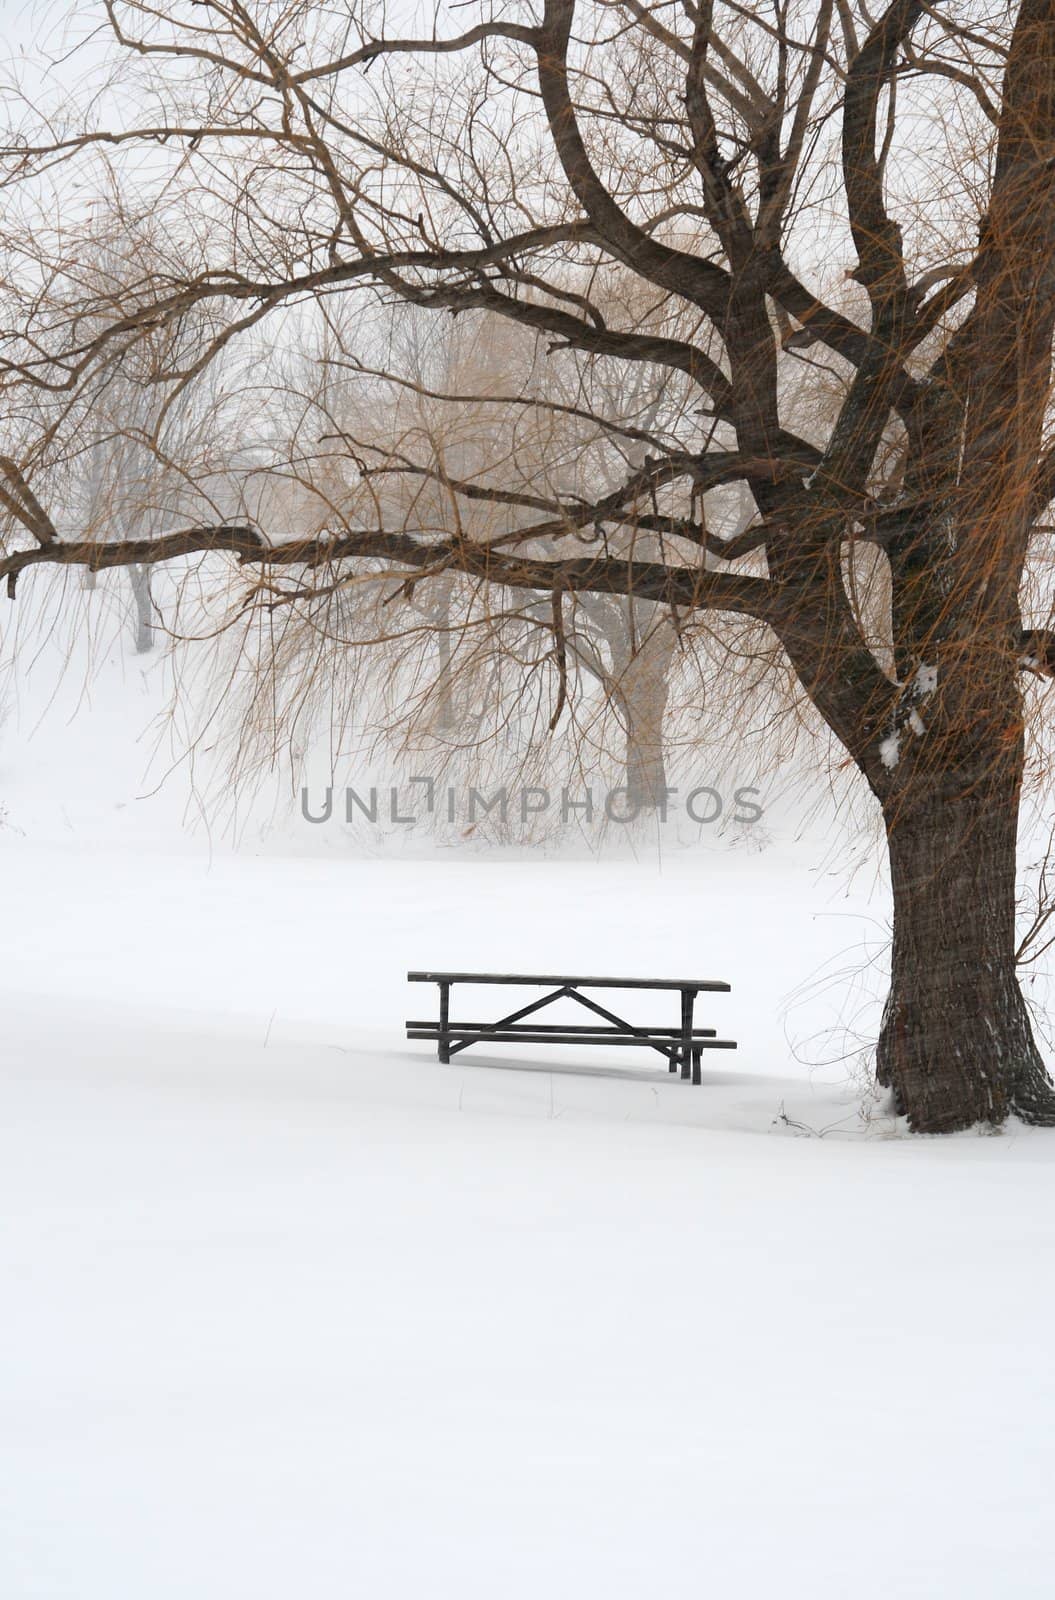 Picnic table in snow under a tree by anikasalsera